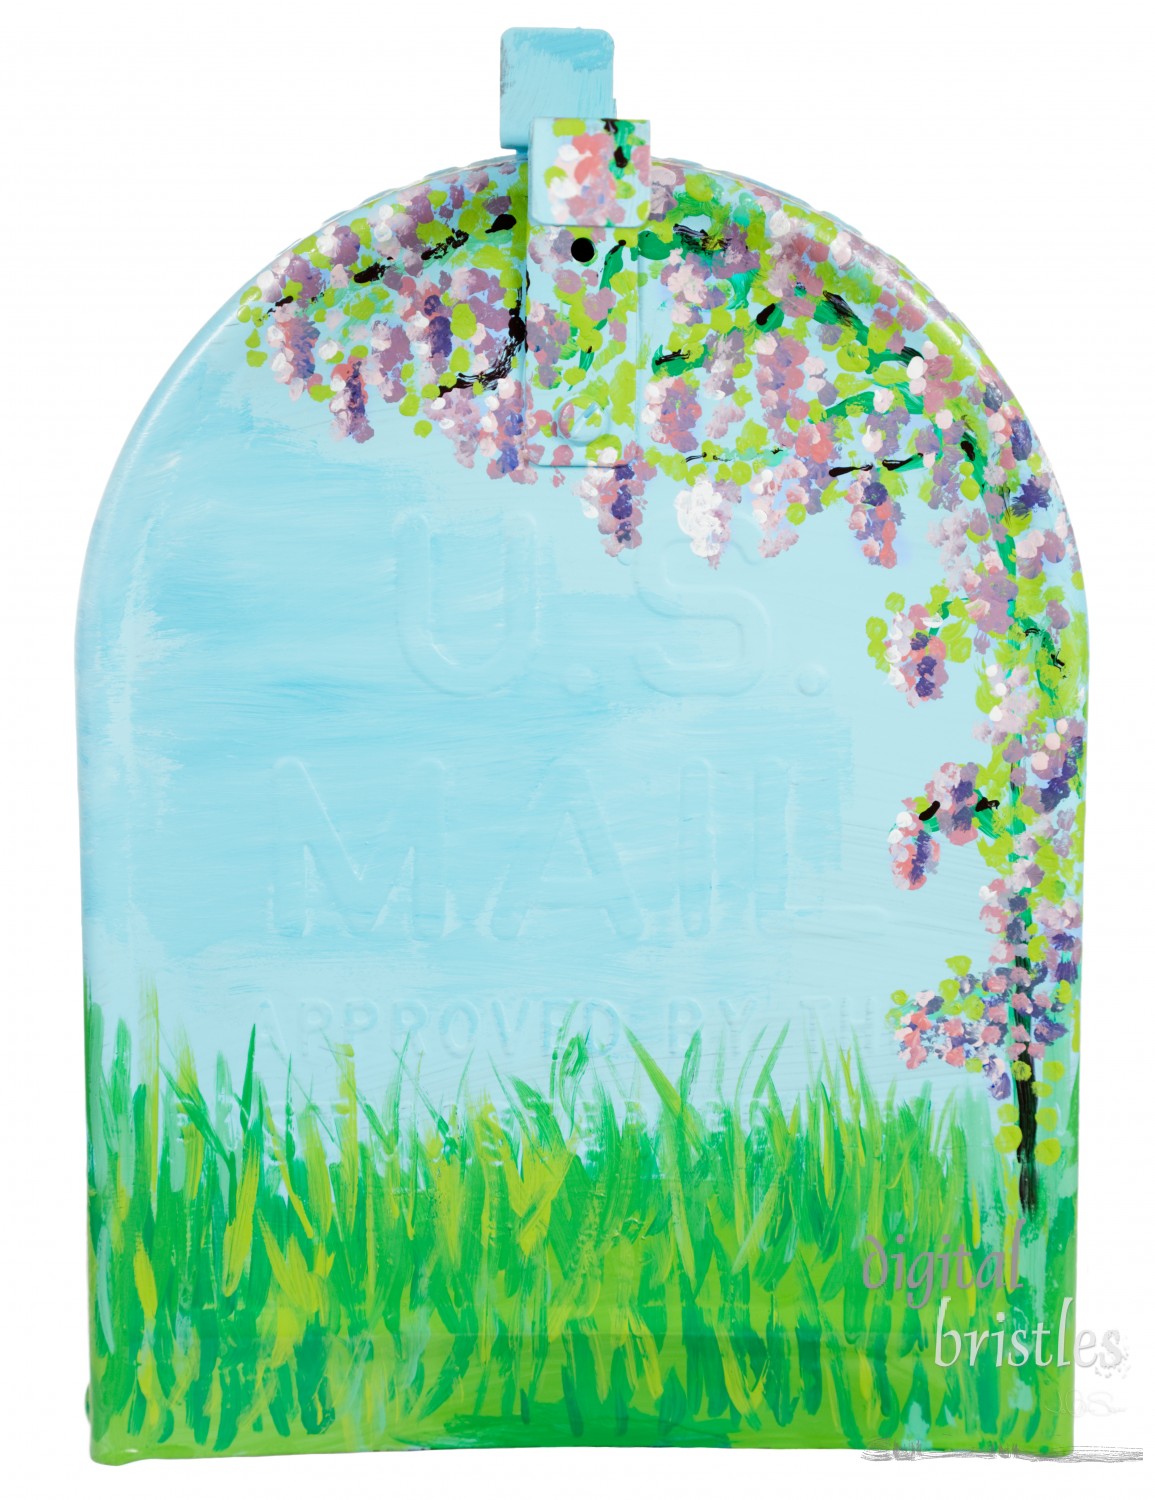 Hand painted wisteria flowers & grass on a mailbox